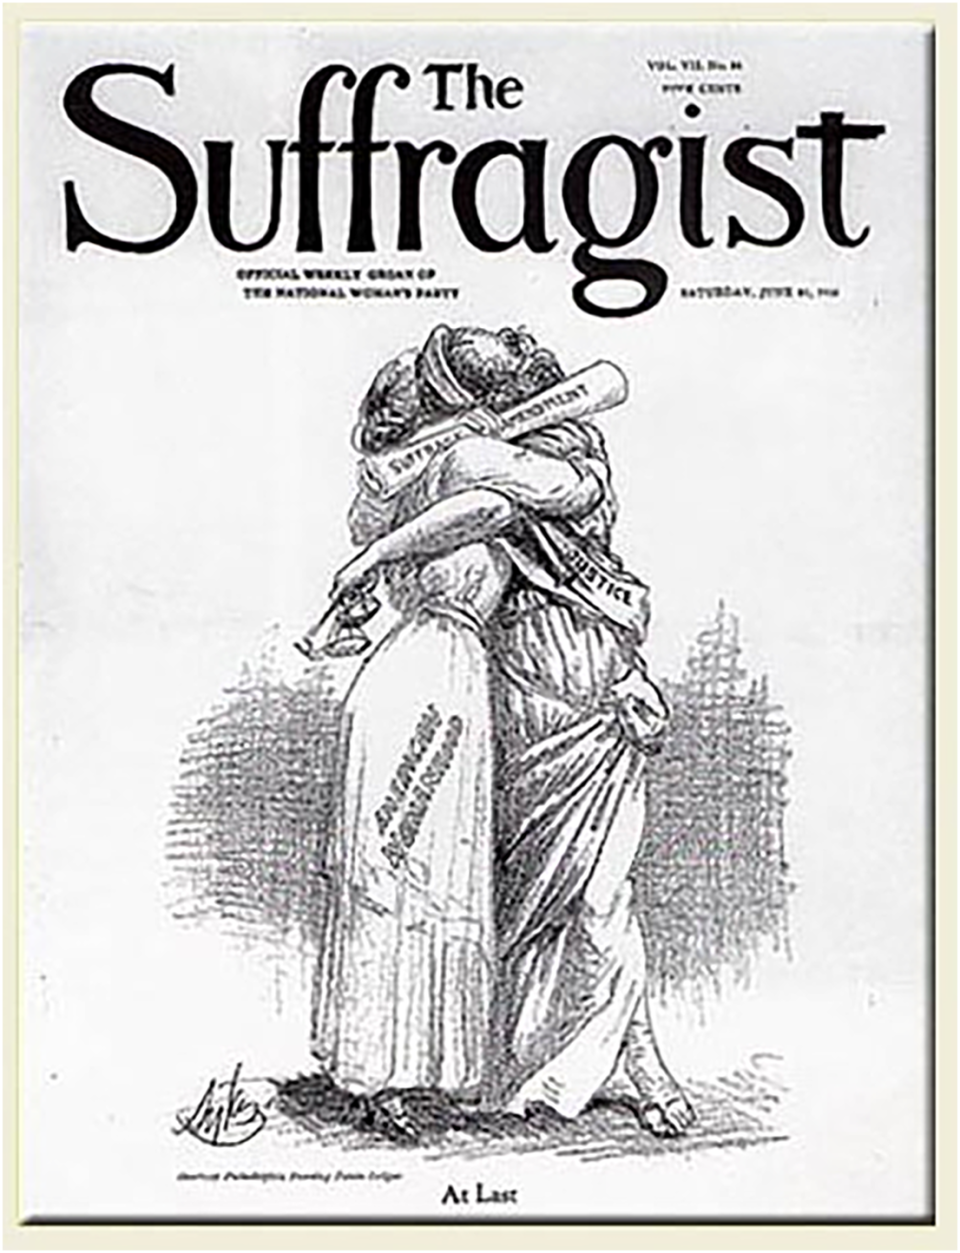 The 19th Amendment was ratified in 1920 -- but before its official ratification, women's right to vote was celebrated by The Suffragist newspaper in June of 1919, after the amendment passed through the Senate, with a powerful cover: two women embracing, the words "At Last" the only caption.&nbsp;